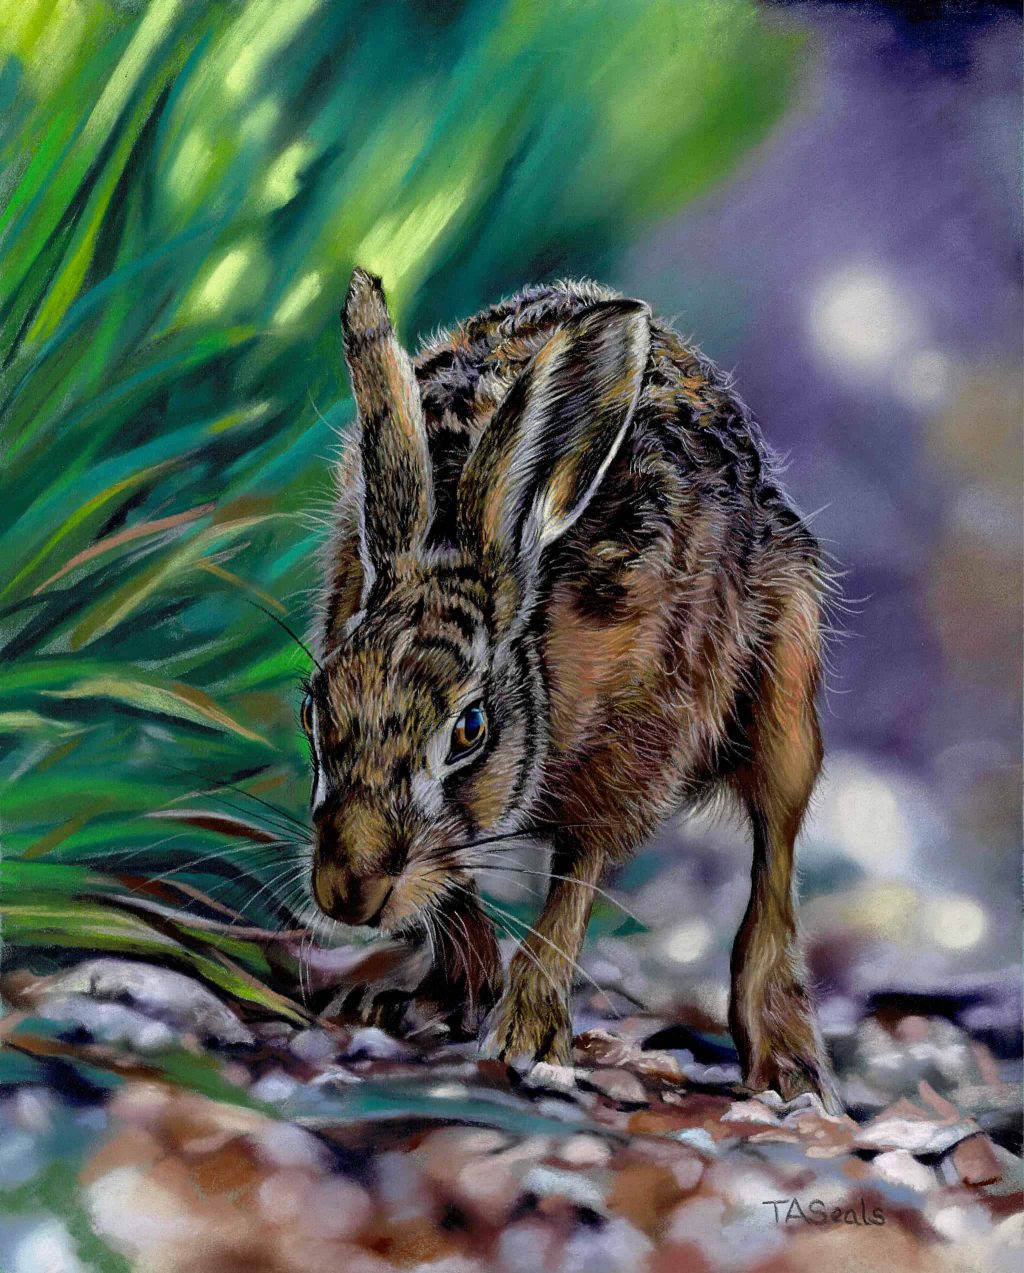 Suffolk Hare on path in dappled light in soft pastel by Teresa Seals Art